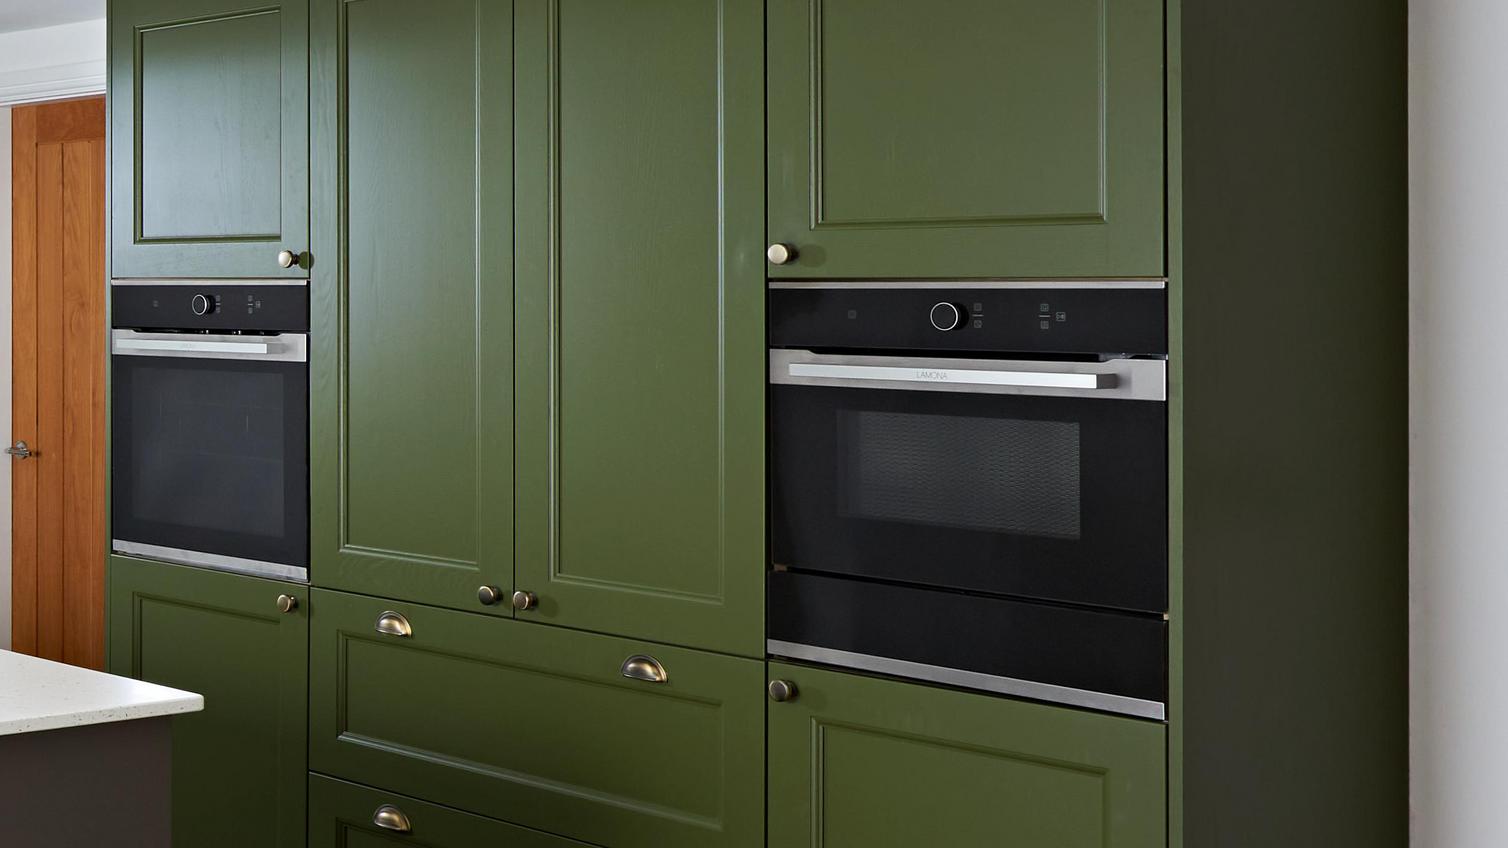 Black Lamona appliances integrated into tall cabinets. The units have olive green door fronts in a shaker style.